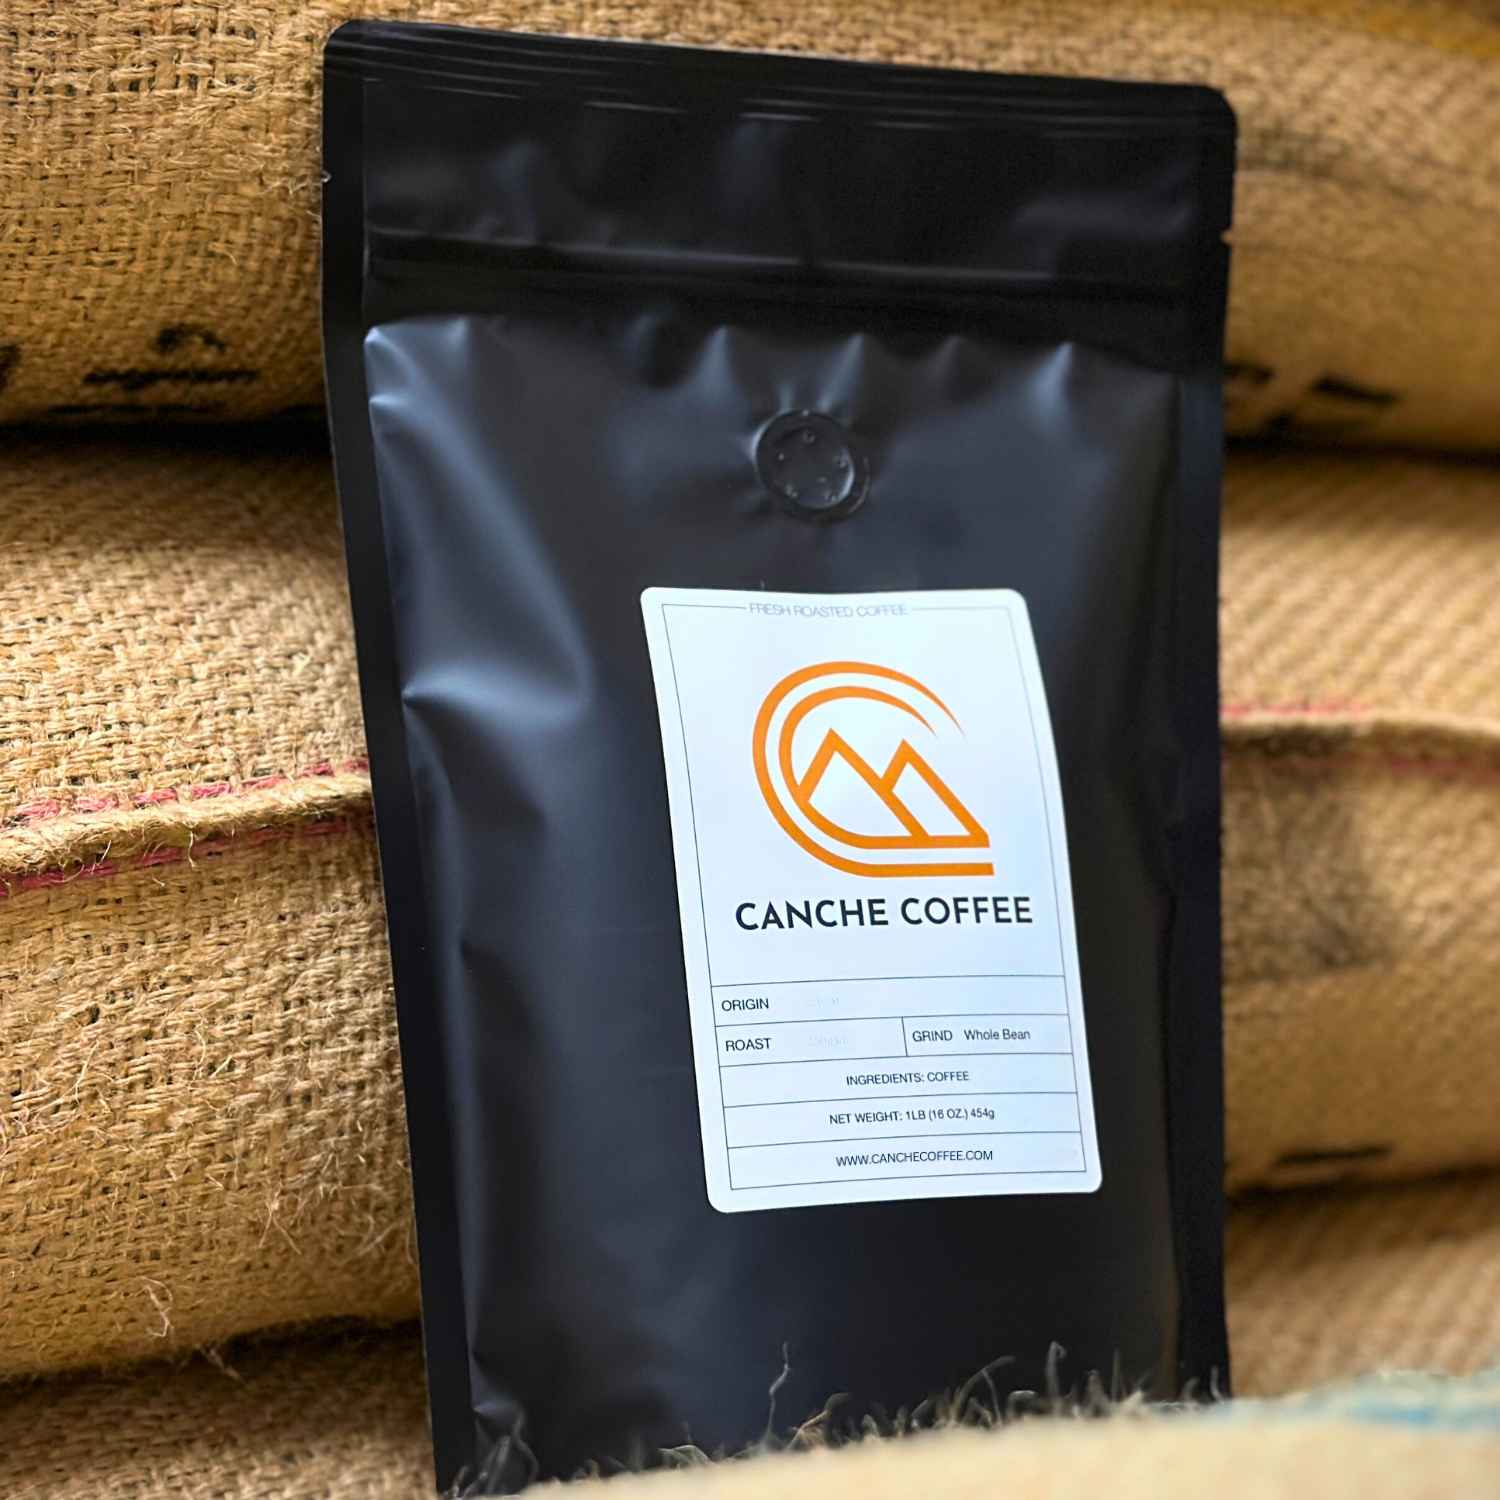 Candy Cane - Canche Coffee